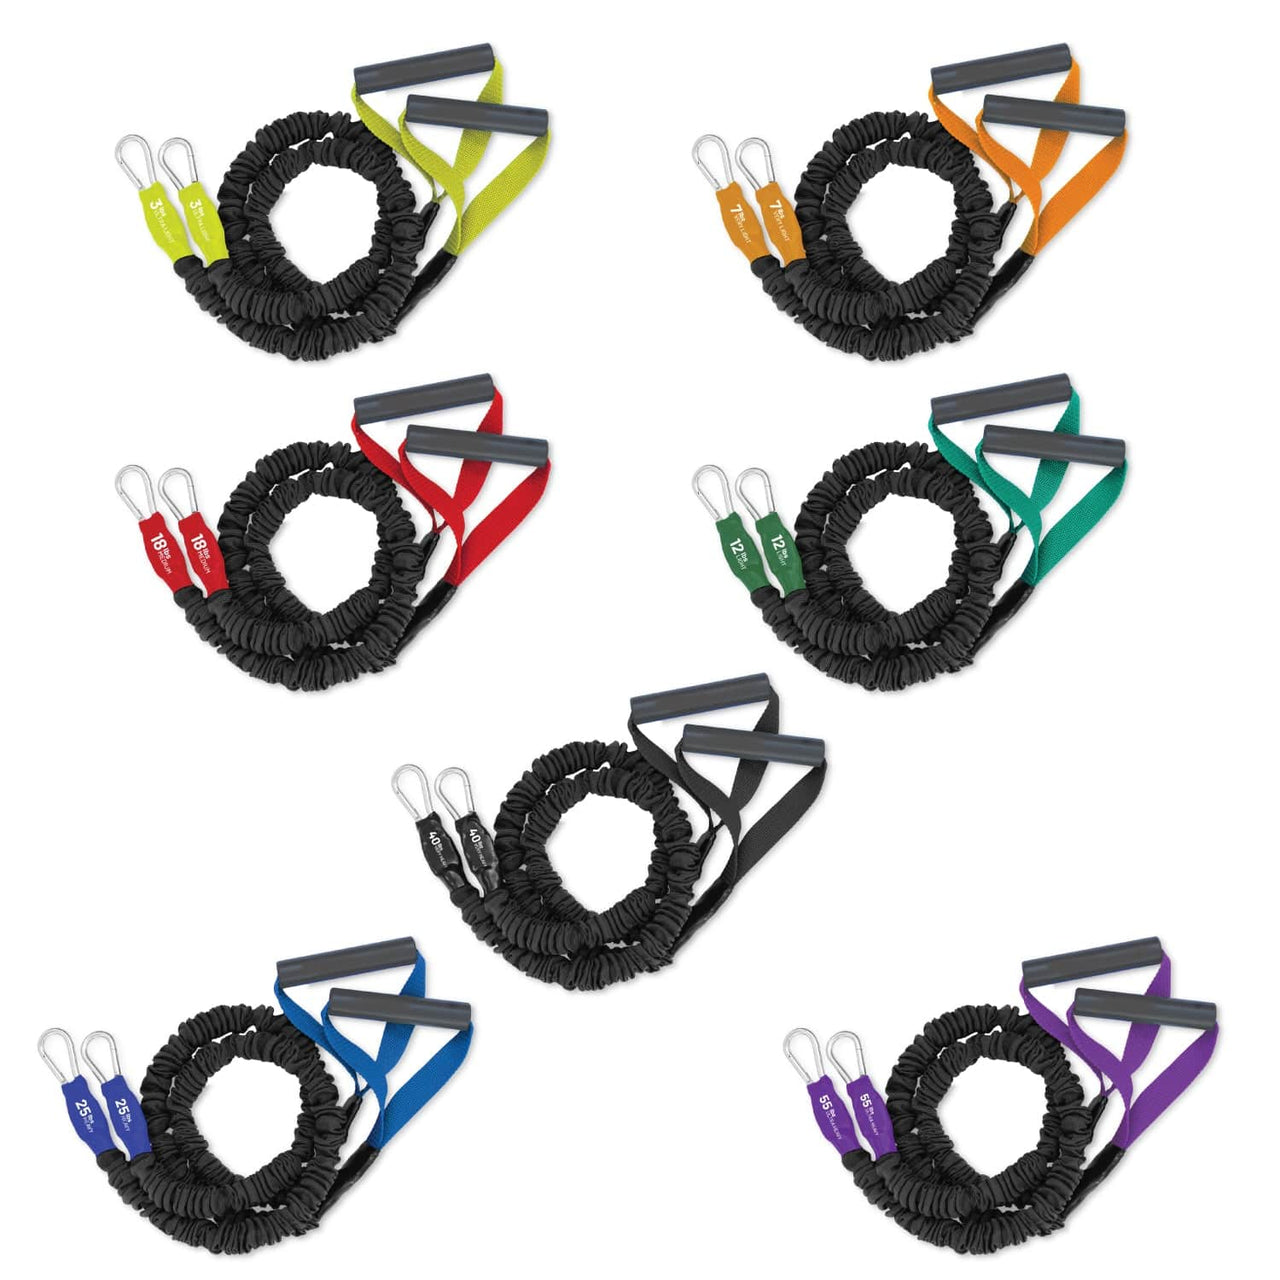 X-Over Resistance Bands Full Set (All 7 Levels)